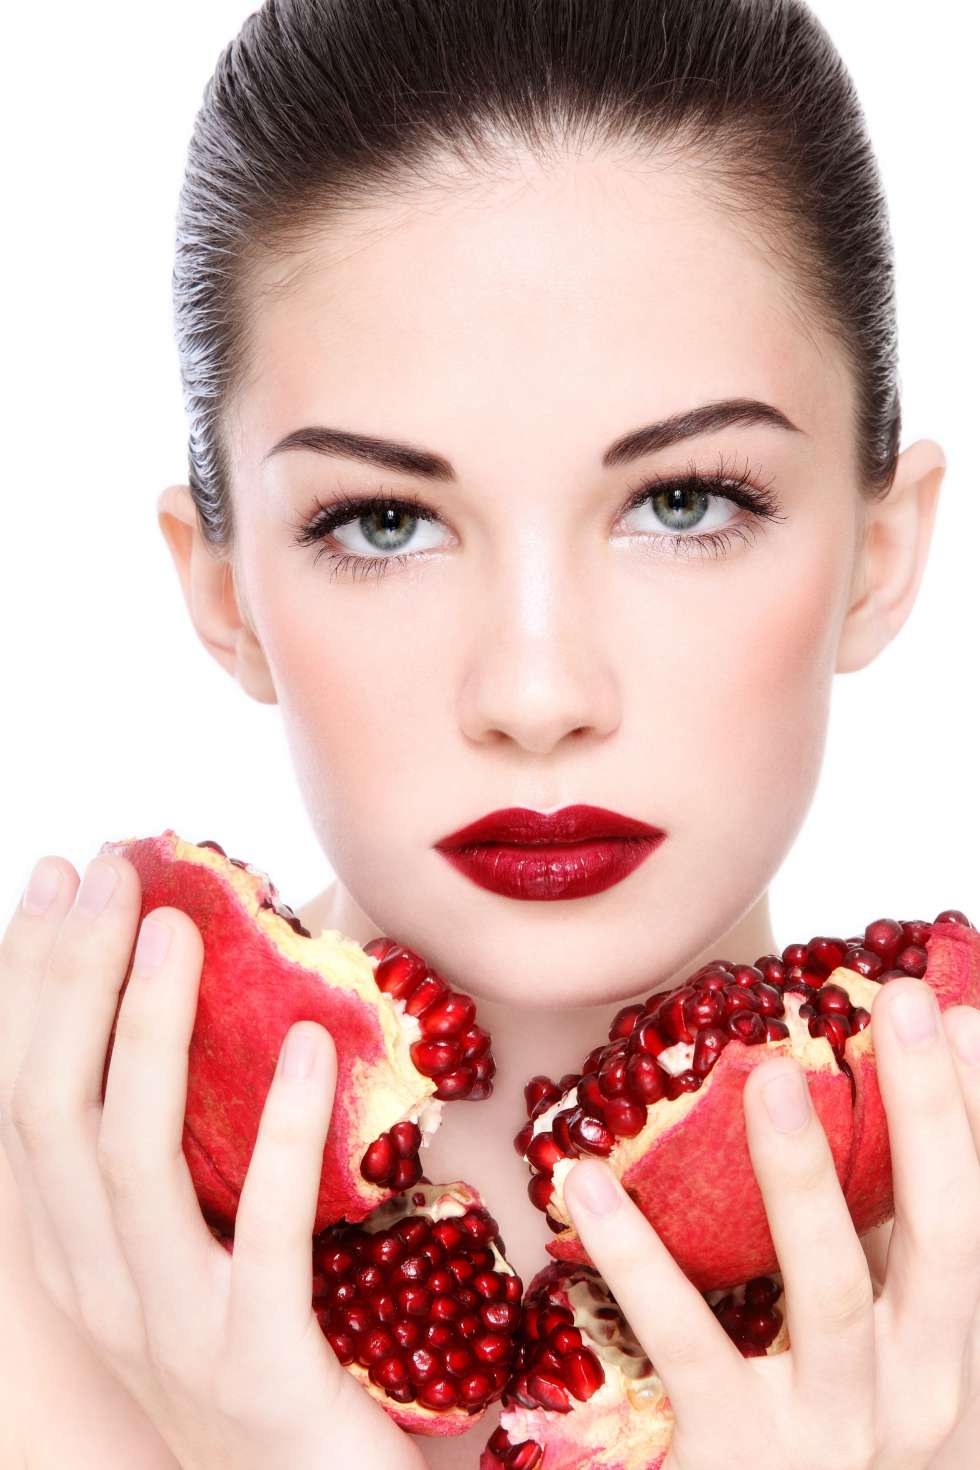 The Top Benefits Of Pomegranate For Your Skin